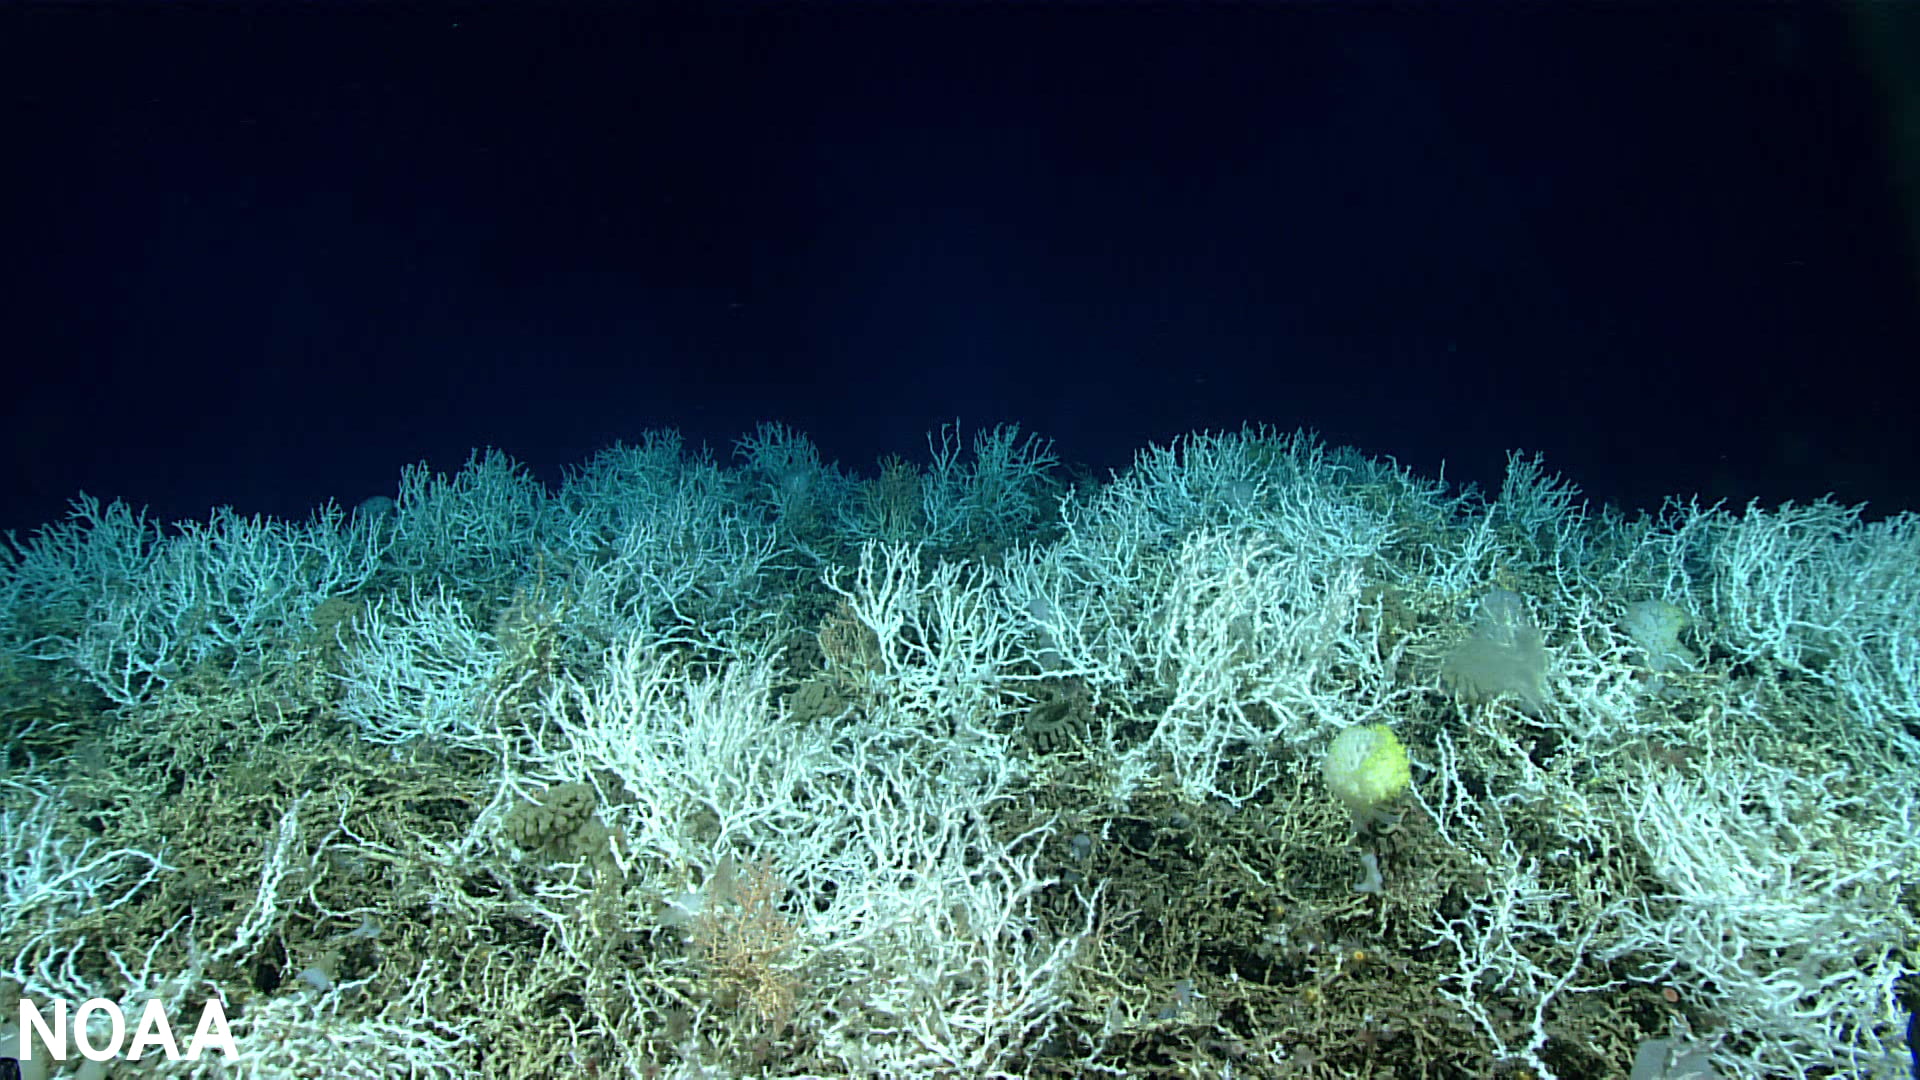 2 Coral mounds NOAA Ocean Exploration 2019 Window to the Deep